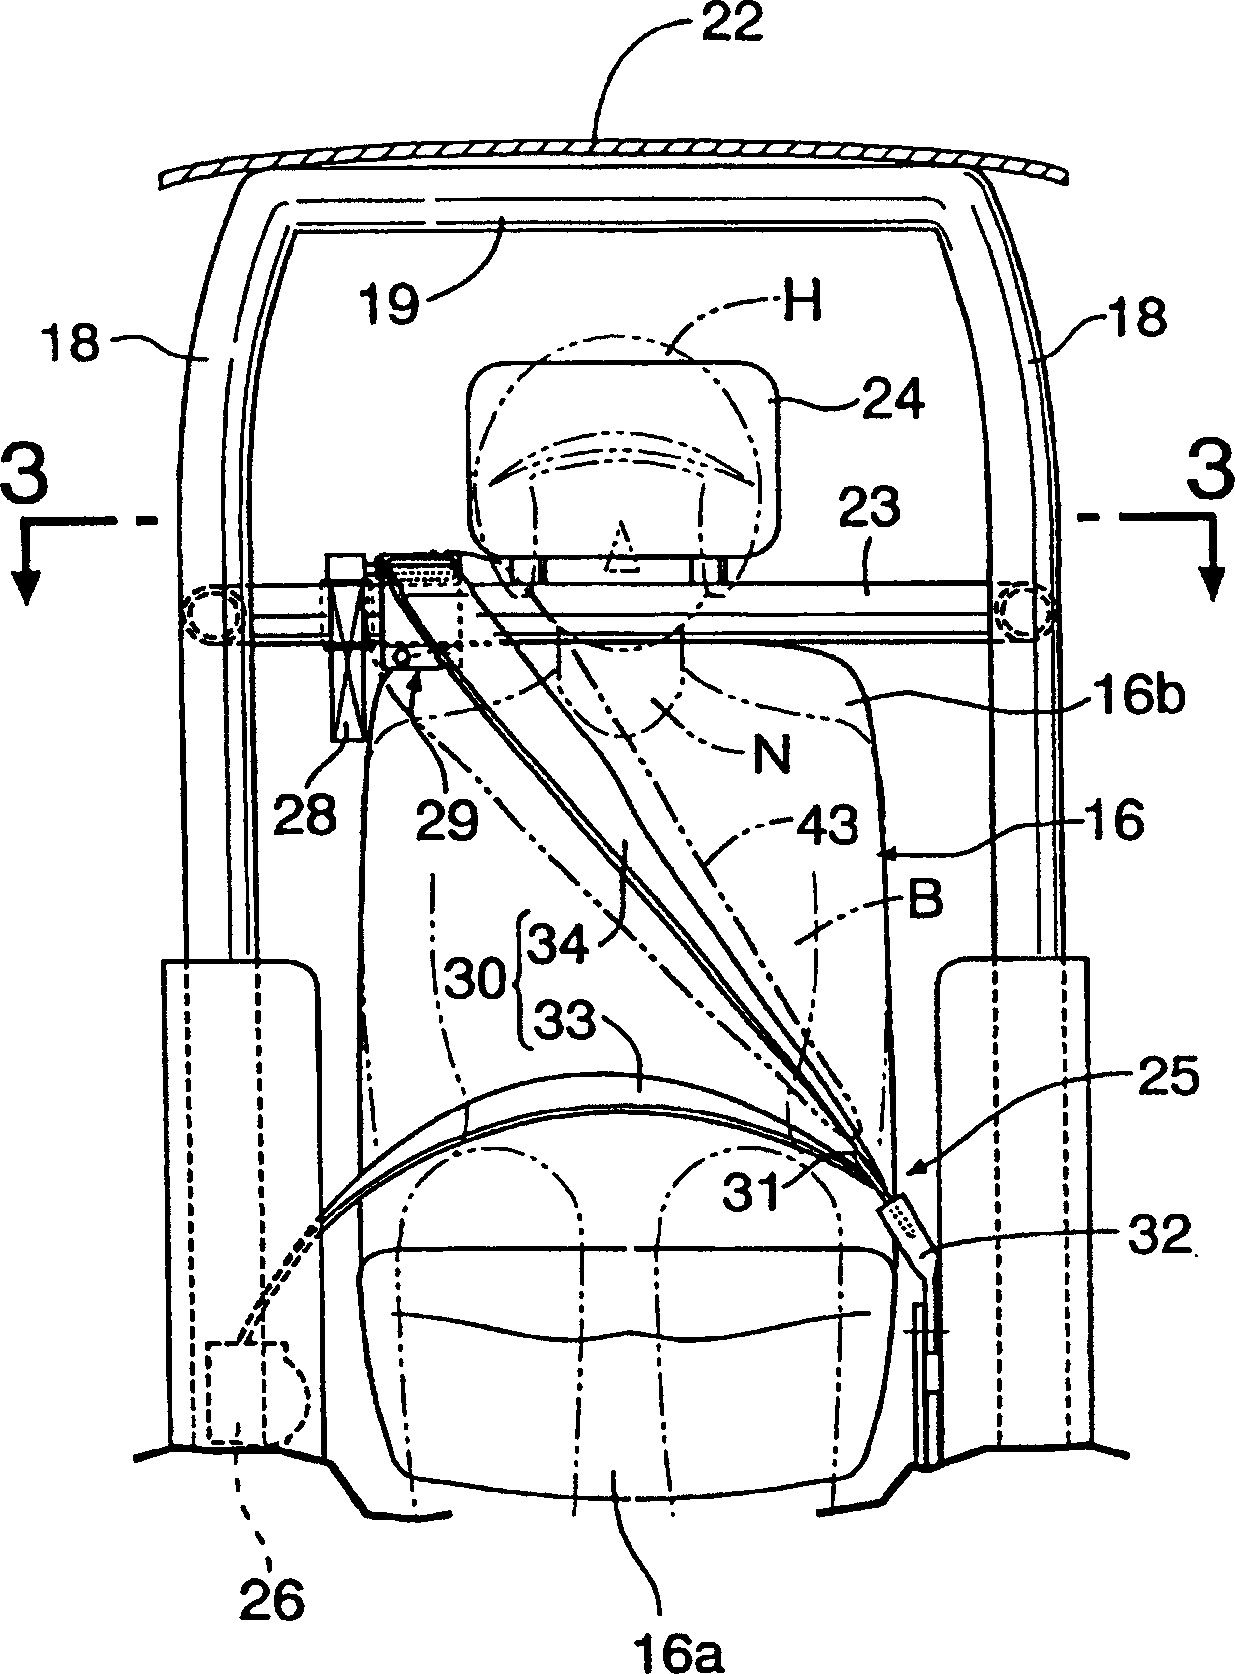 Device for protecting occupant on vehicle